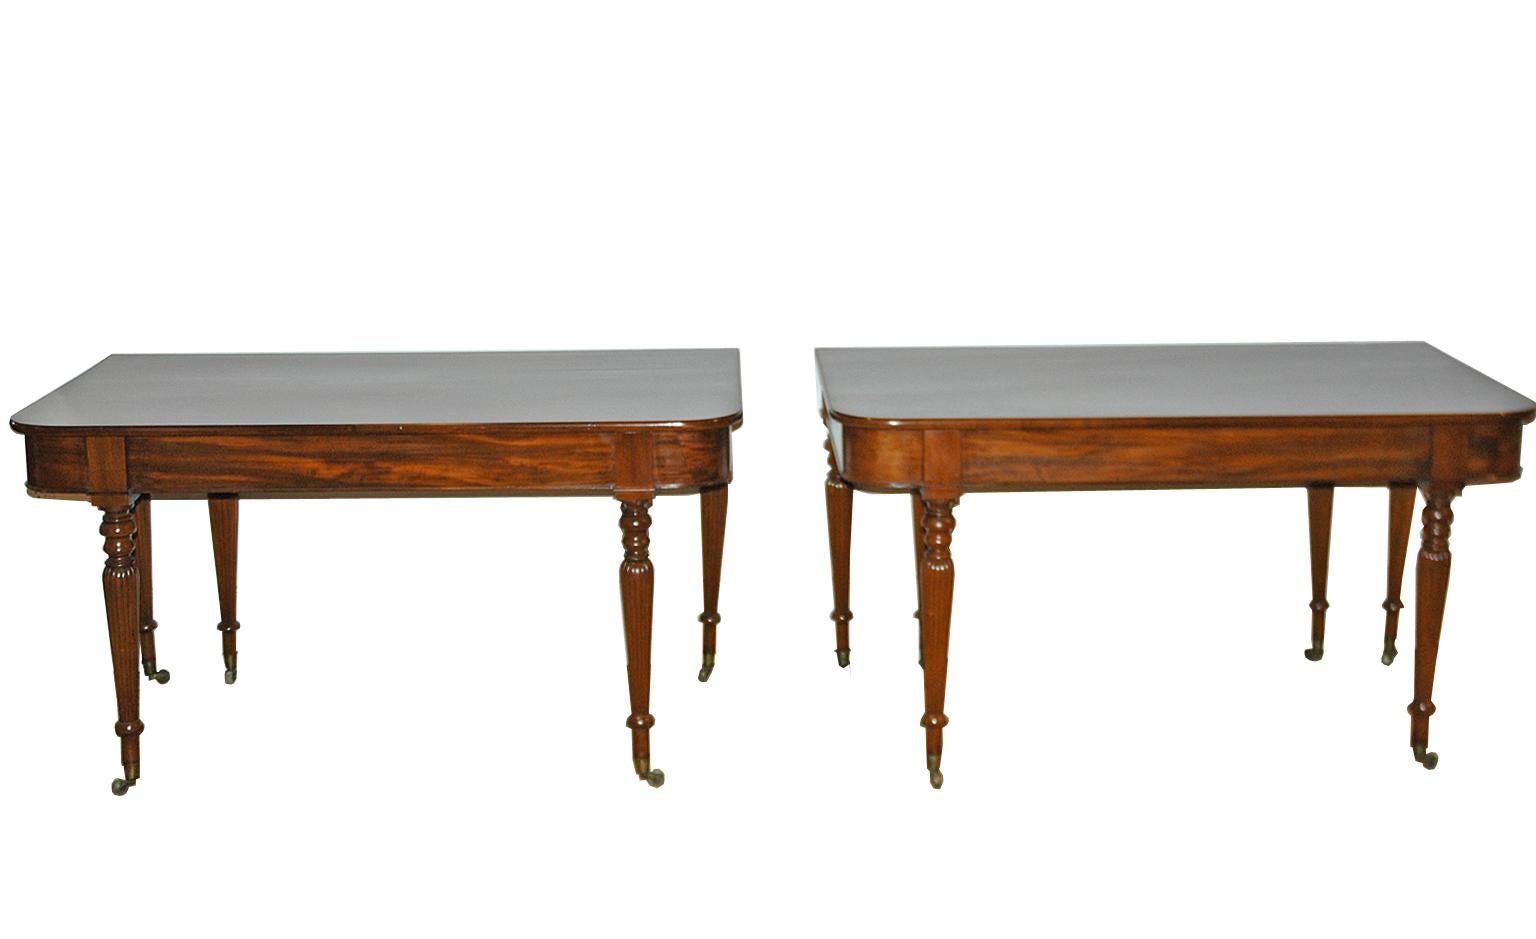 Long English Regency Banquet Dining Table in Mahogany w/ 4 Leaves, c. 1820 5